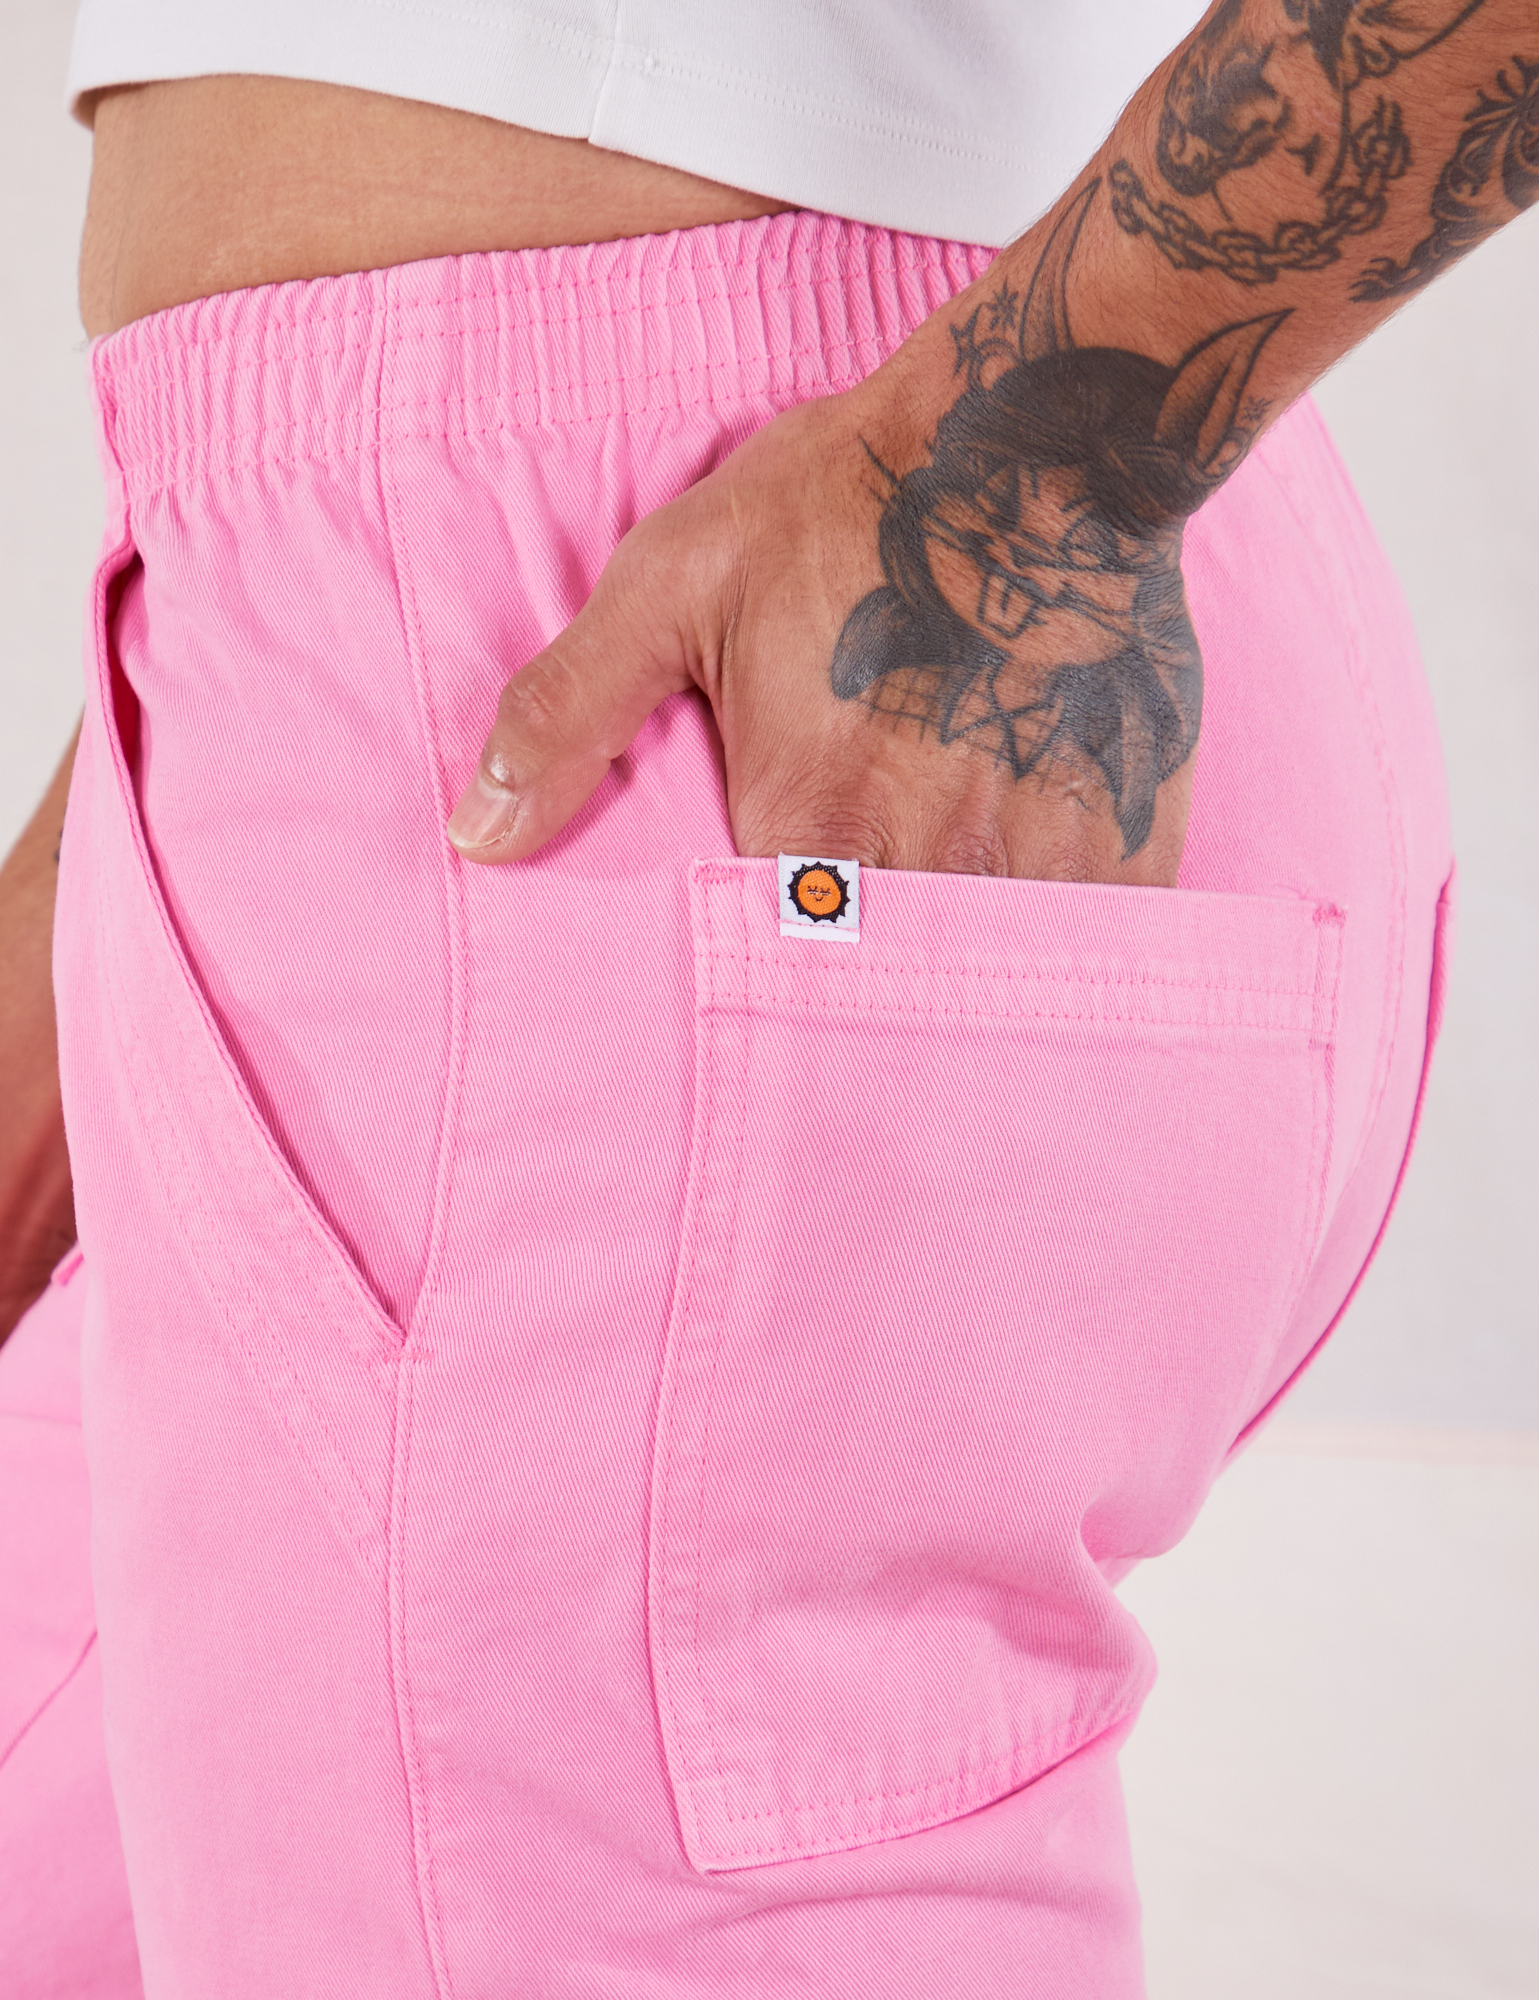 Action Pants in Bubblegum Pink side close up. Jesse has their hand in the back pocket.